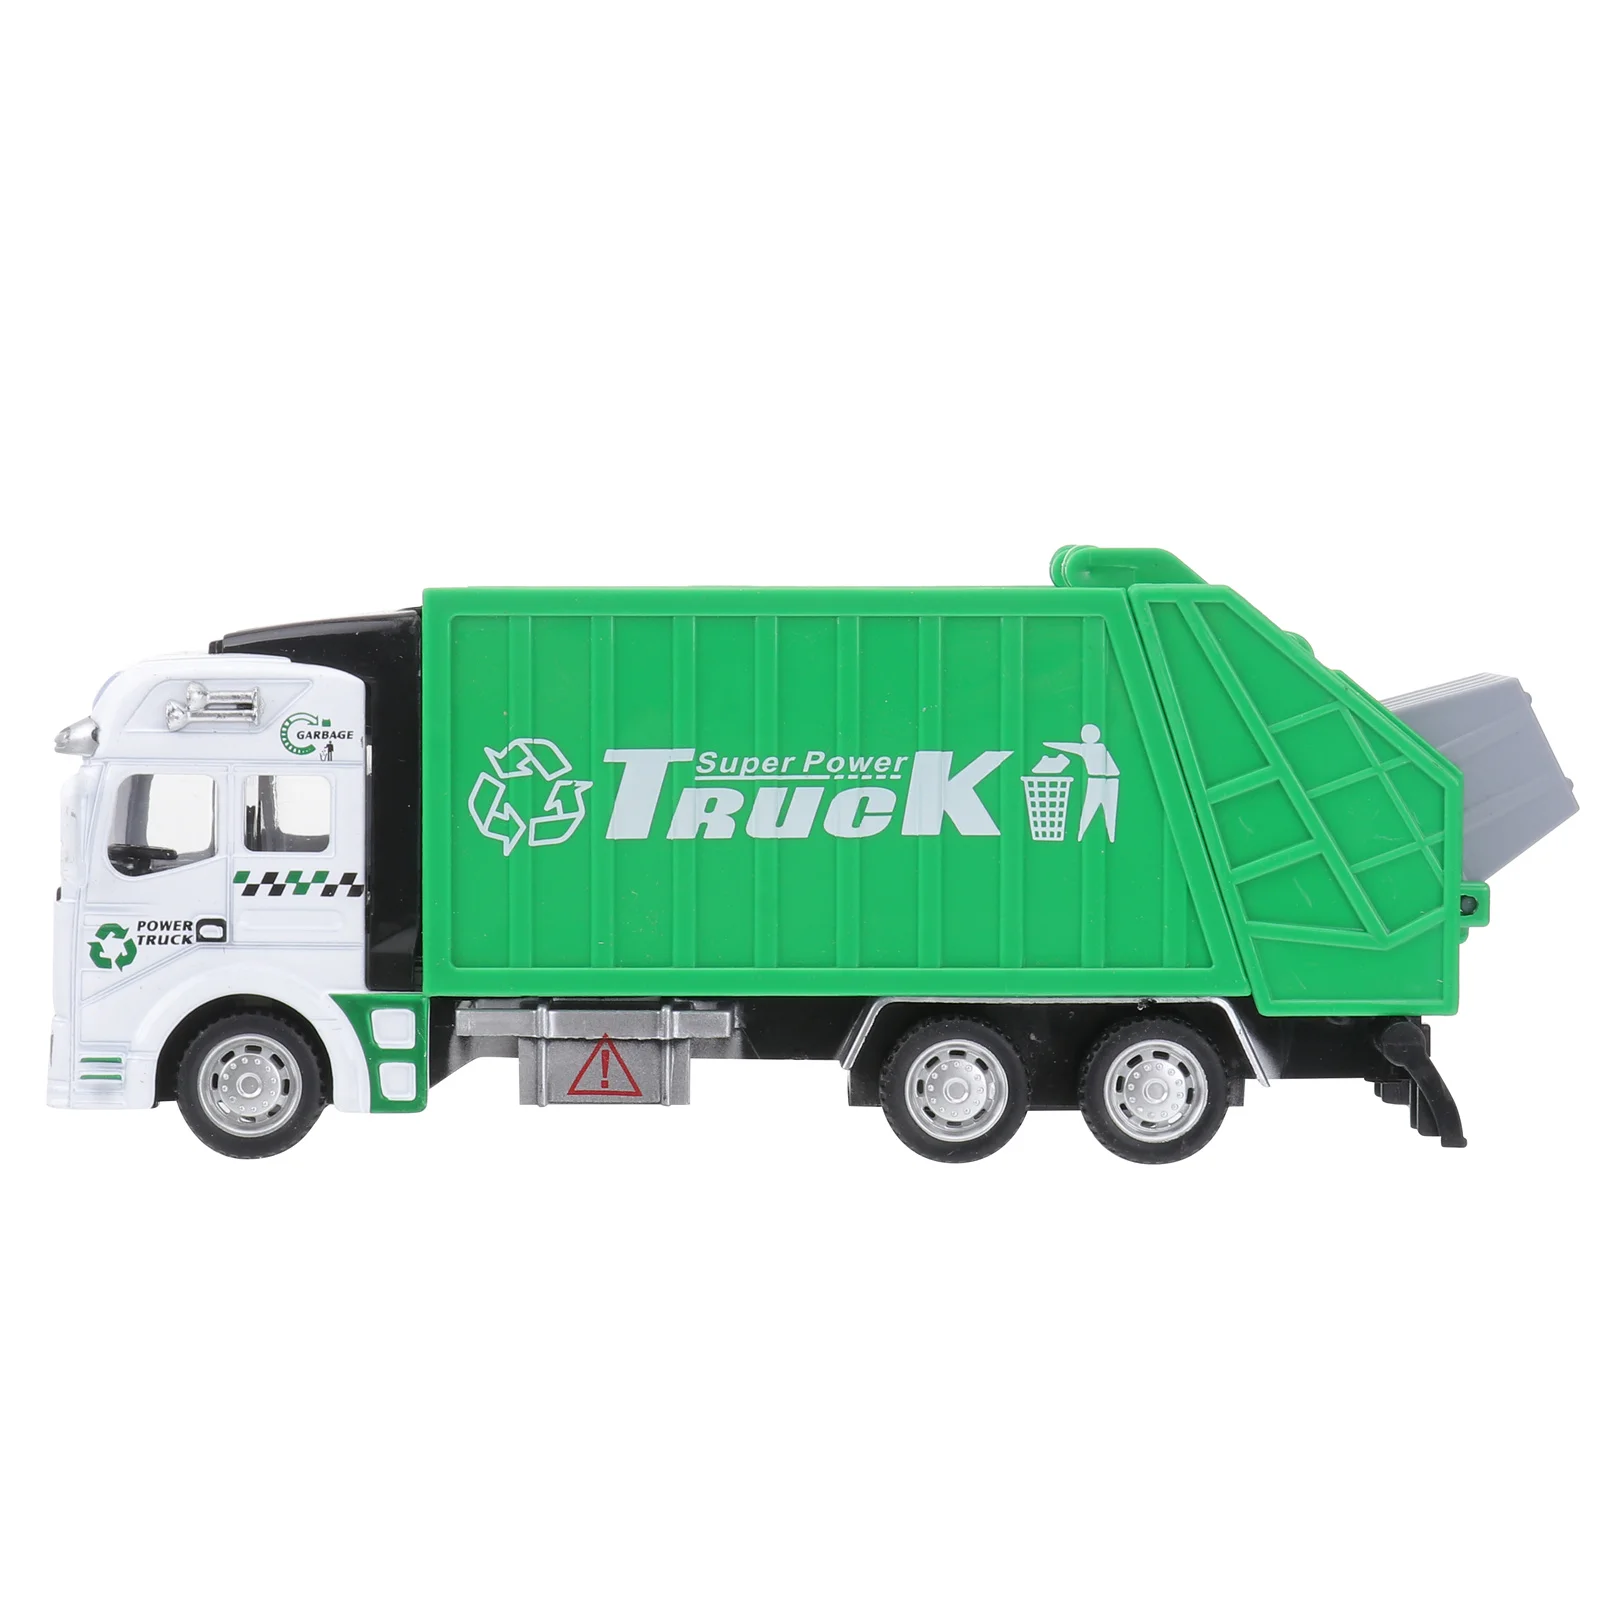 

Garbage Truck Electric Waste Management Recycling Truck Green Trash Truck for Kids Toddlers